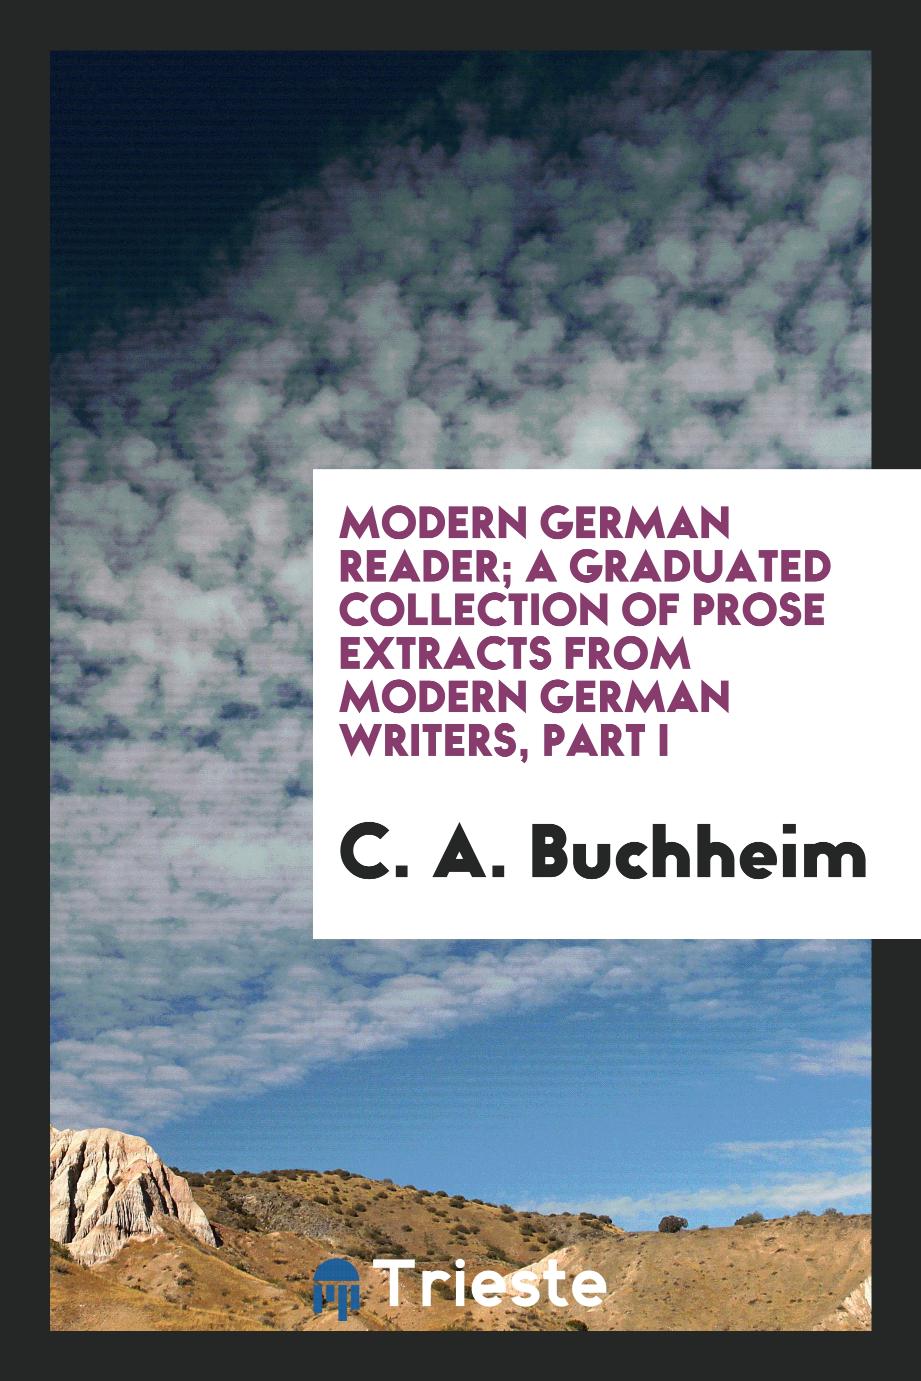 Modern German reader; a graduated collection of prose extracts from modern German writers, part I